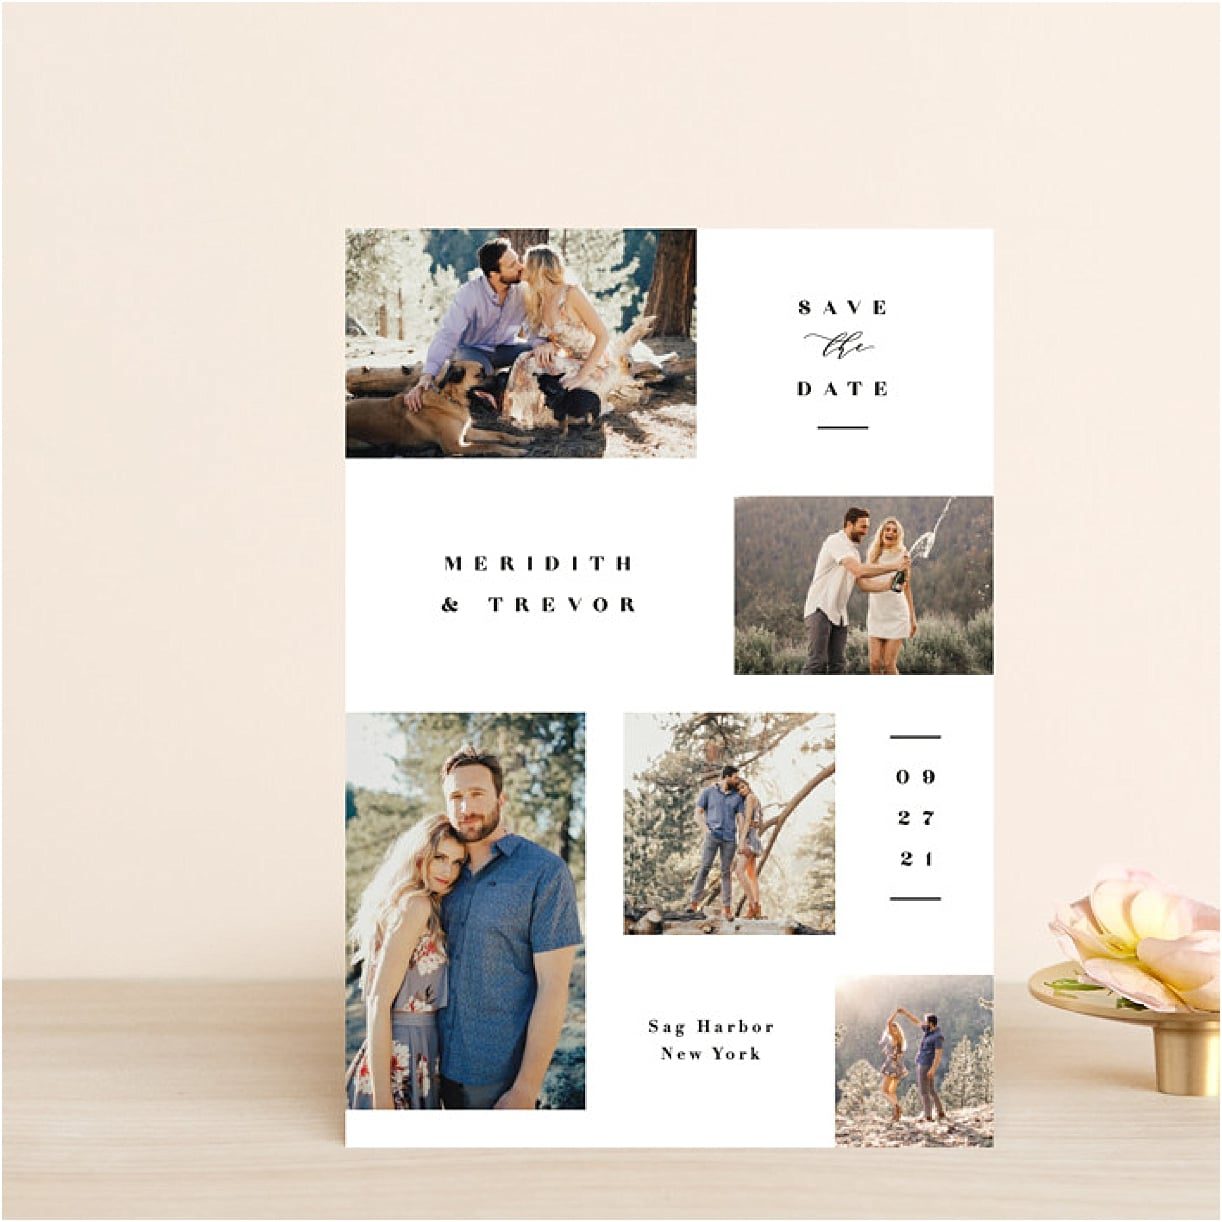 Wedding Save the Dates Ideas from Minted | Hill City Bride Virginia Weddings Blog